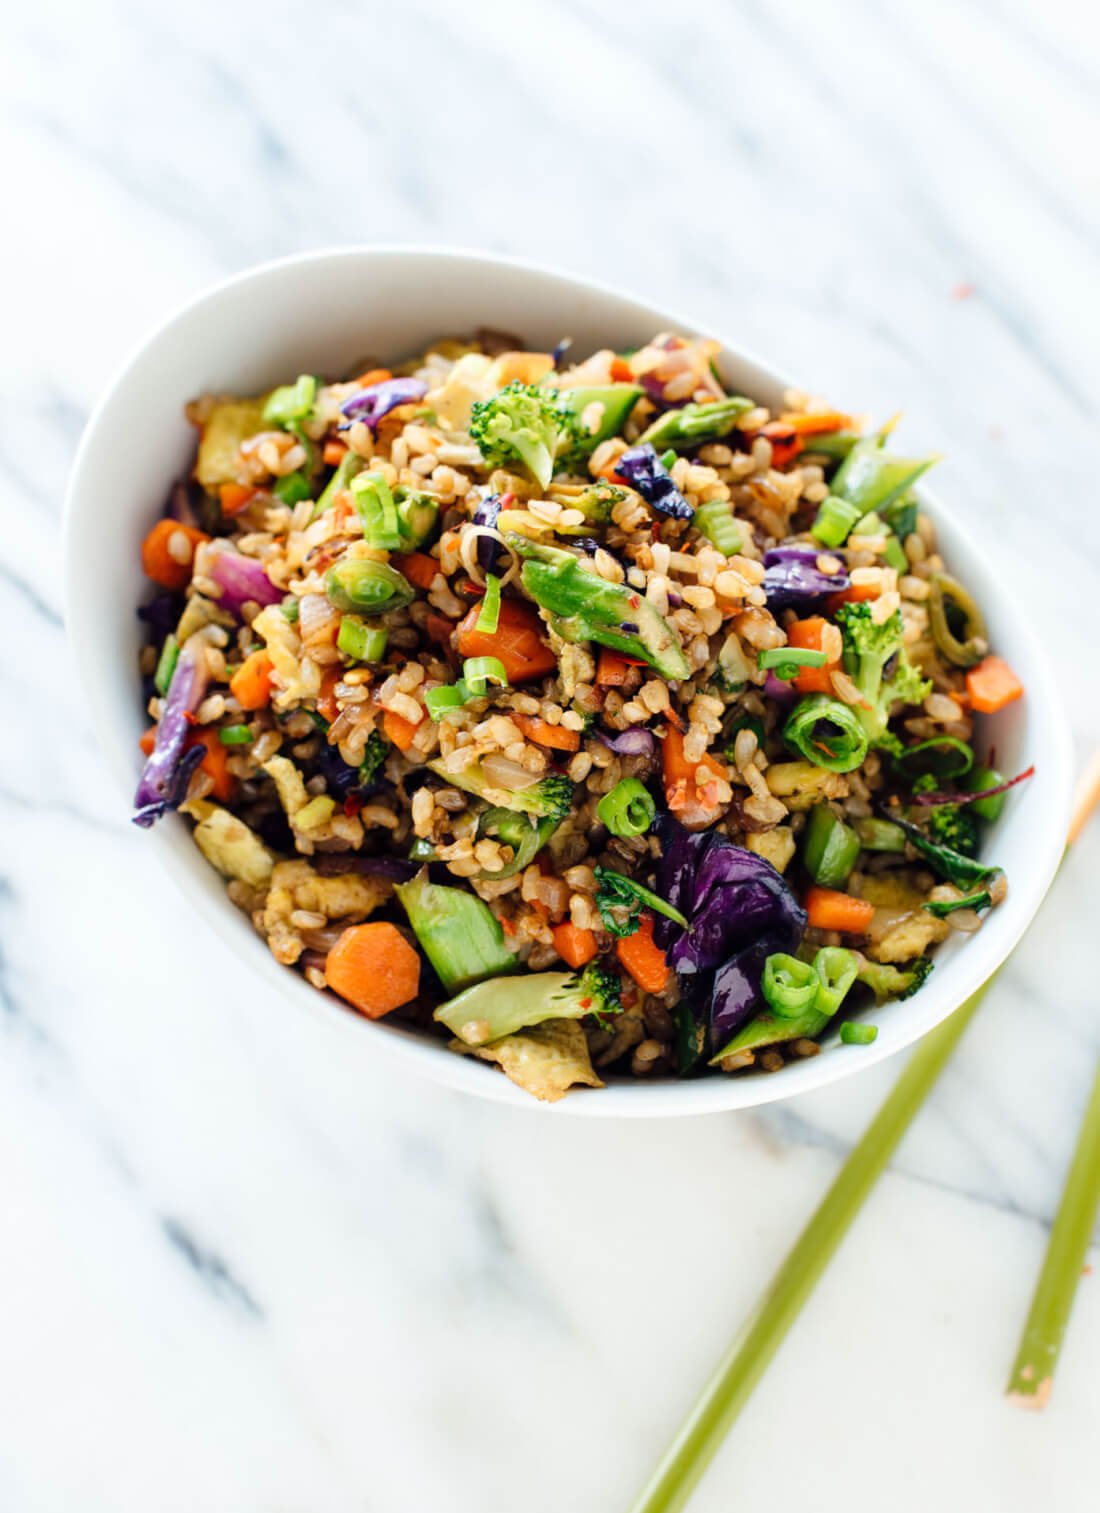 This vegetable fried rice recipe is made with double the vegetables, for flavor and nutrition! Get this vegetarian/gluten free recipe at cookieandkate.com